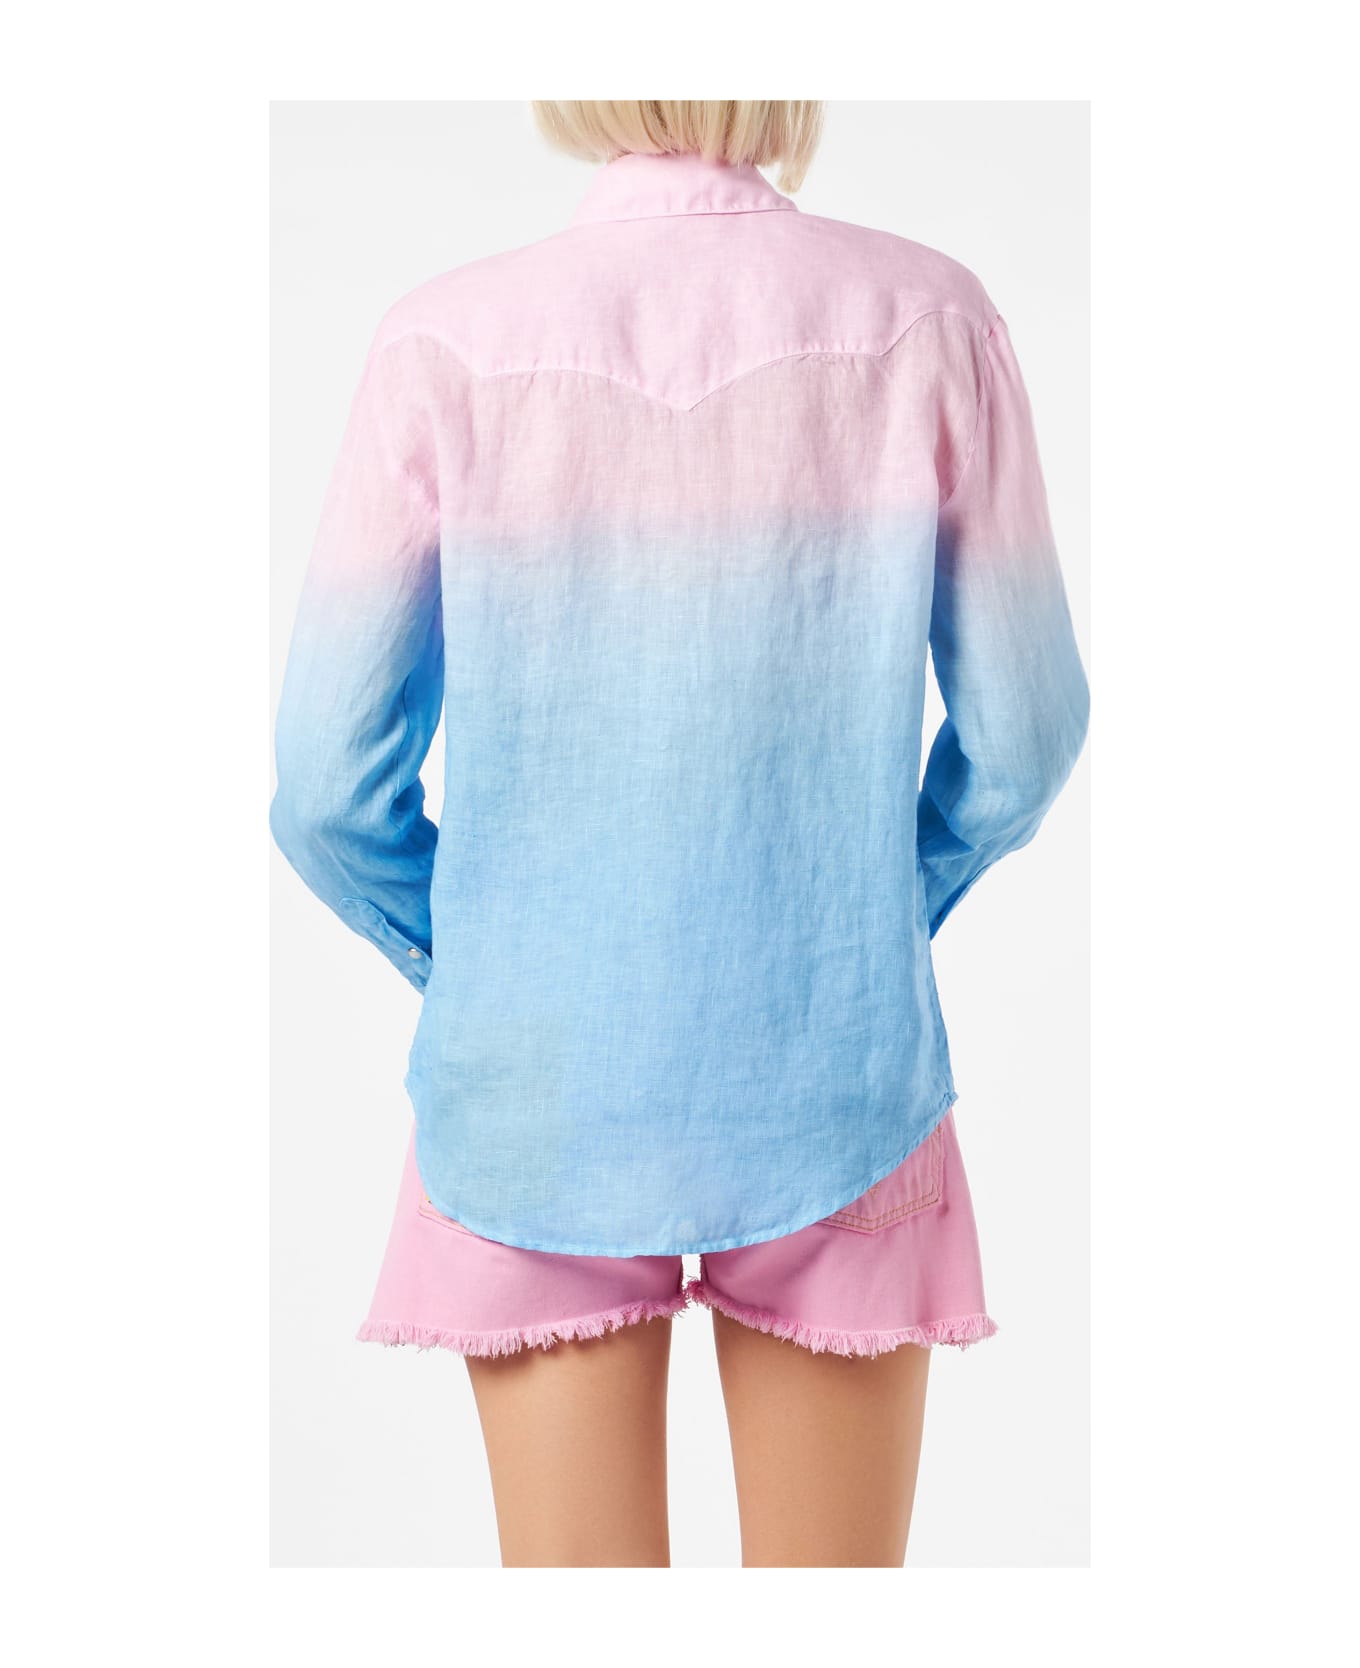 MC2 Saint Barth Woman Shirt With Pink And Blue Gradient Colors - PINK